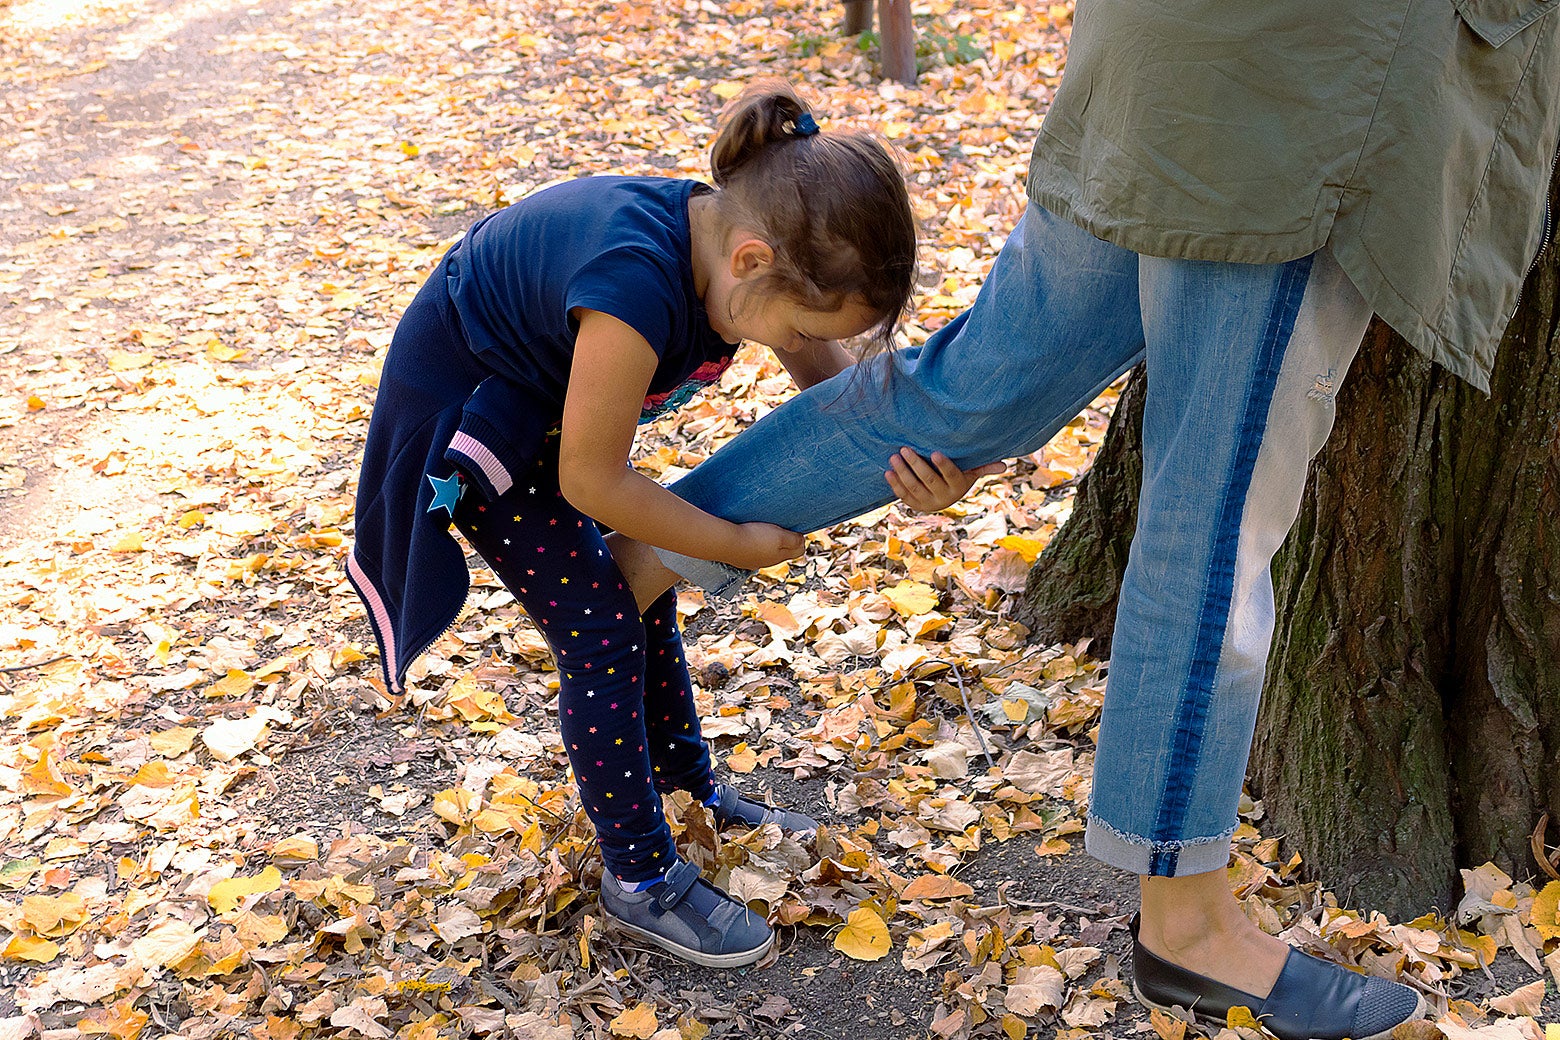 A small girl pulling her mother's leg during an autumn day at the park.